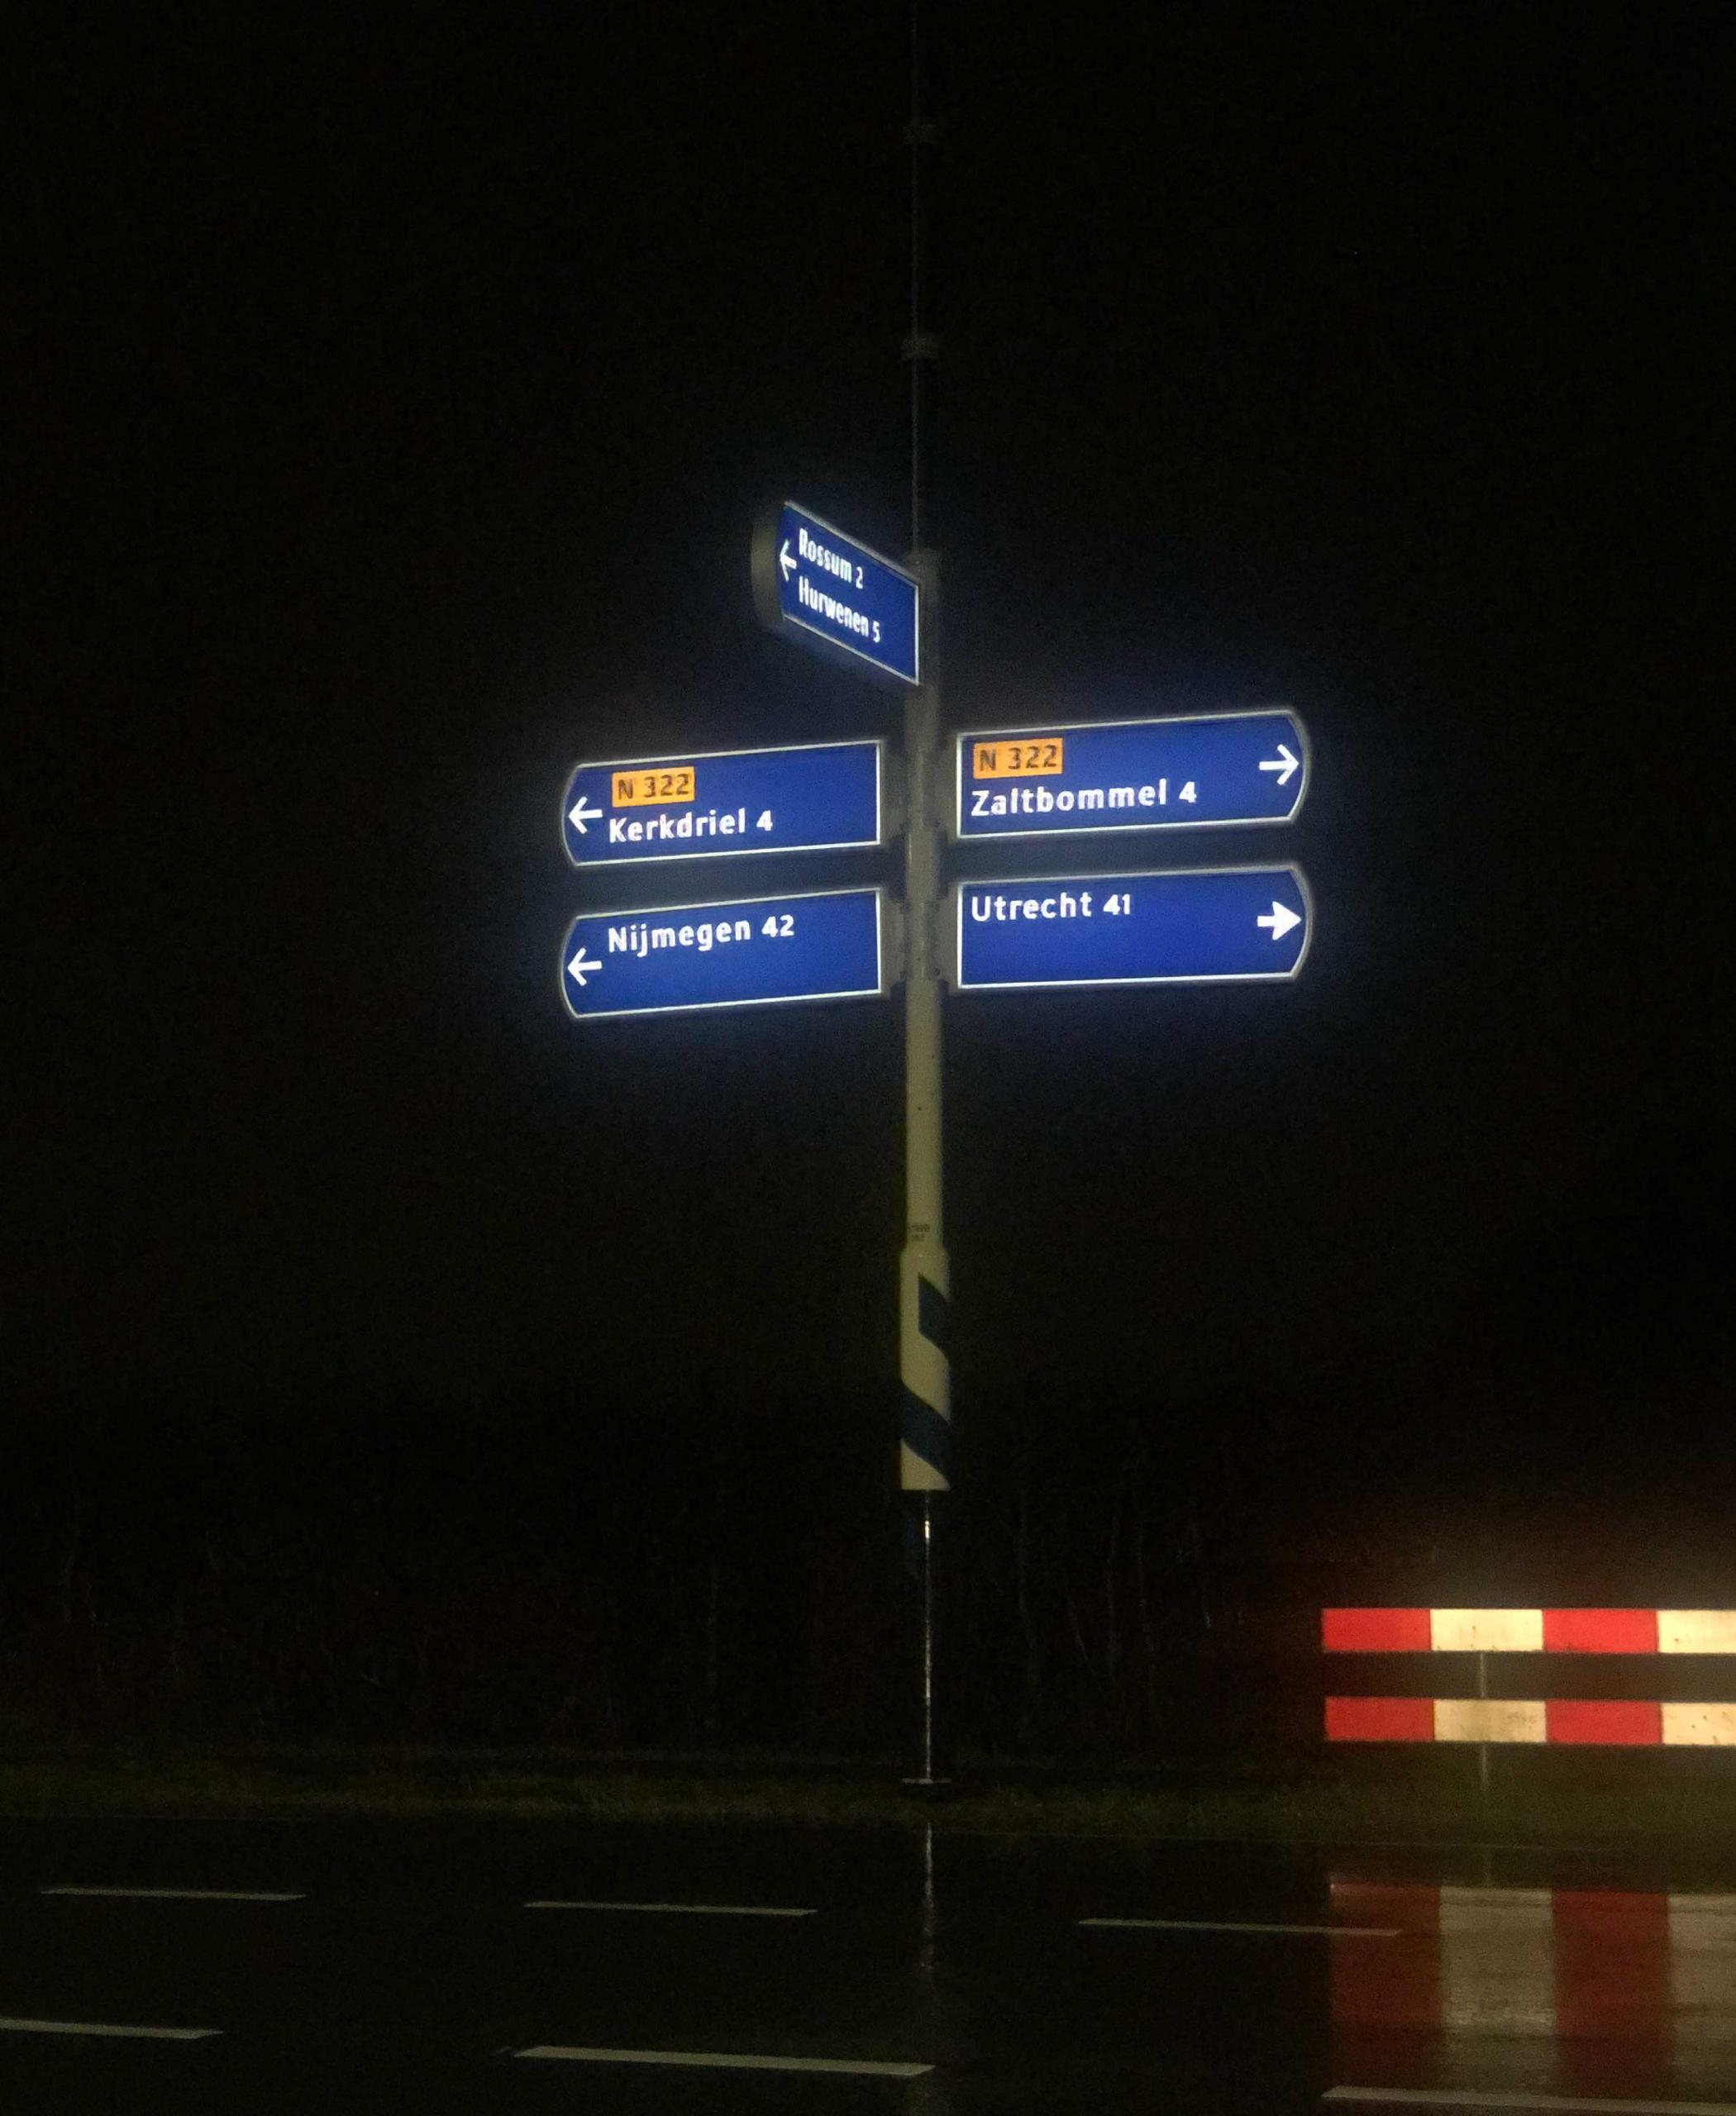 The Soluxio solar-powered sign post at night, with internally illuminated directional signs